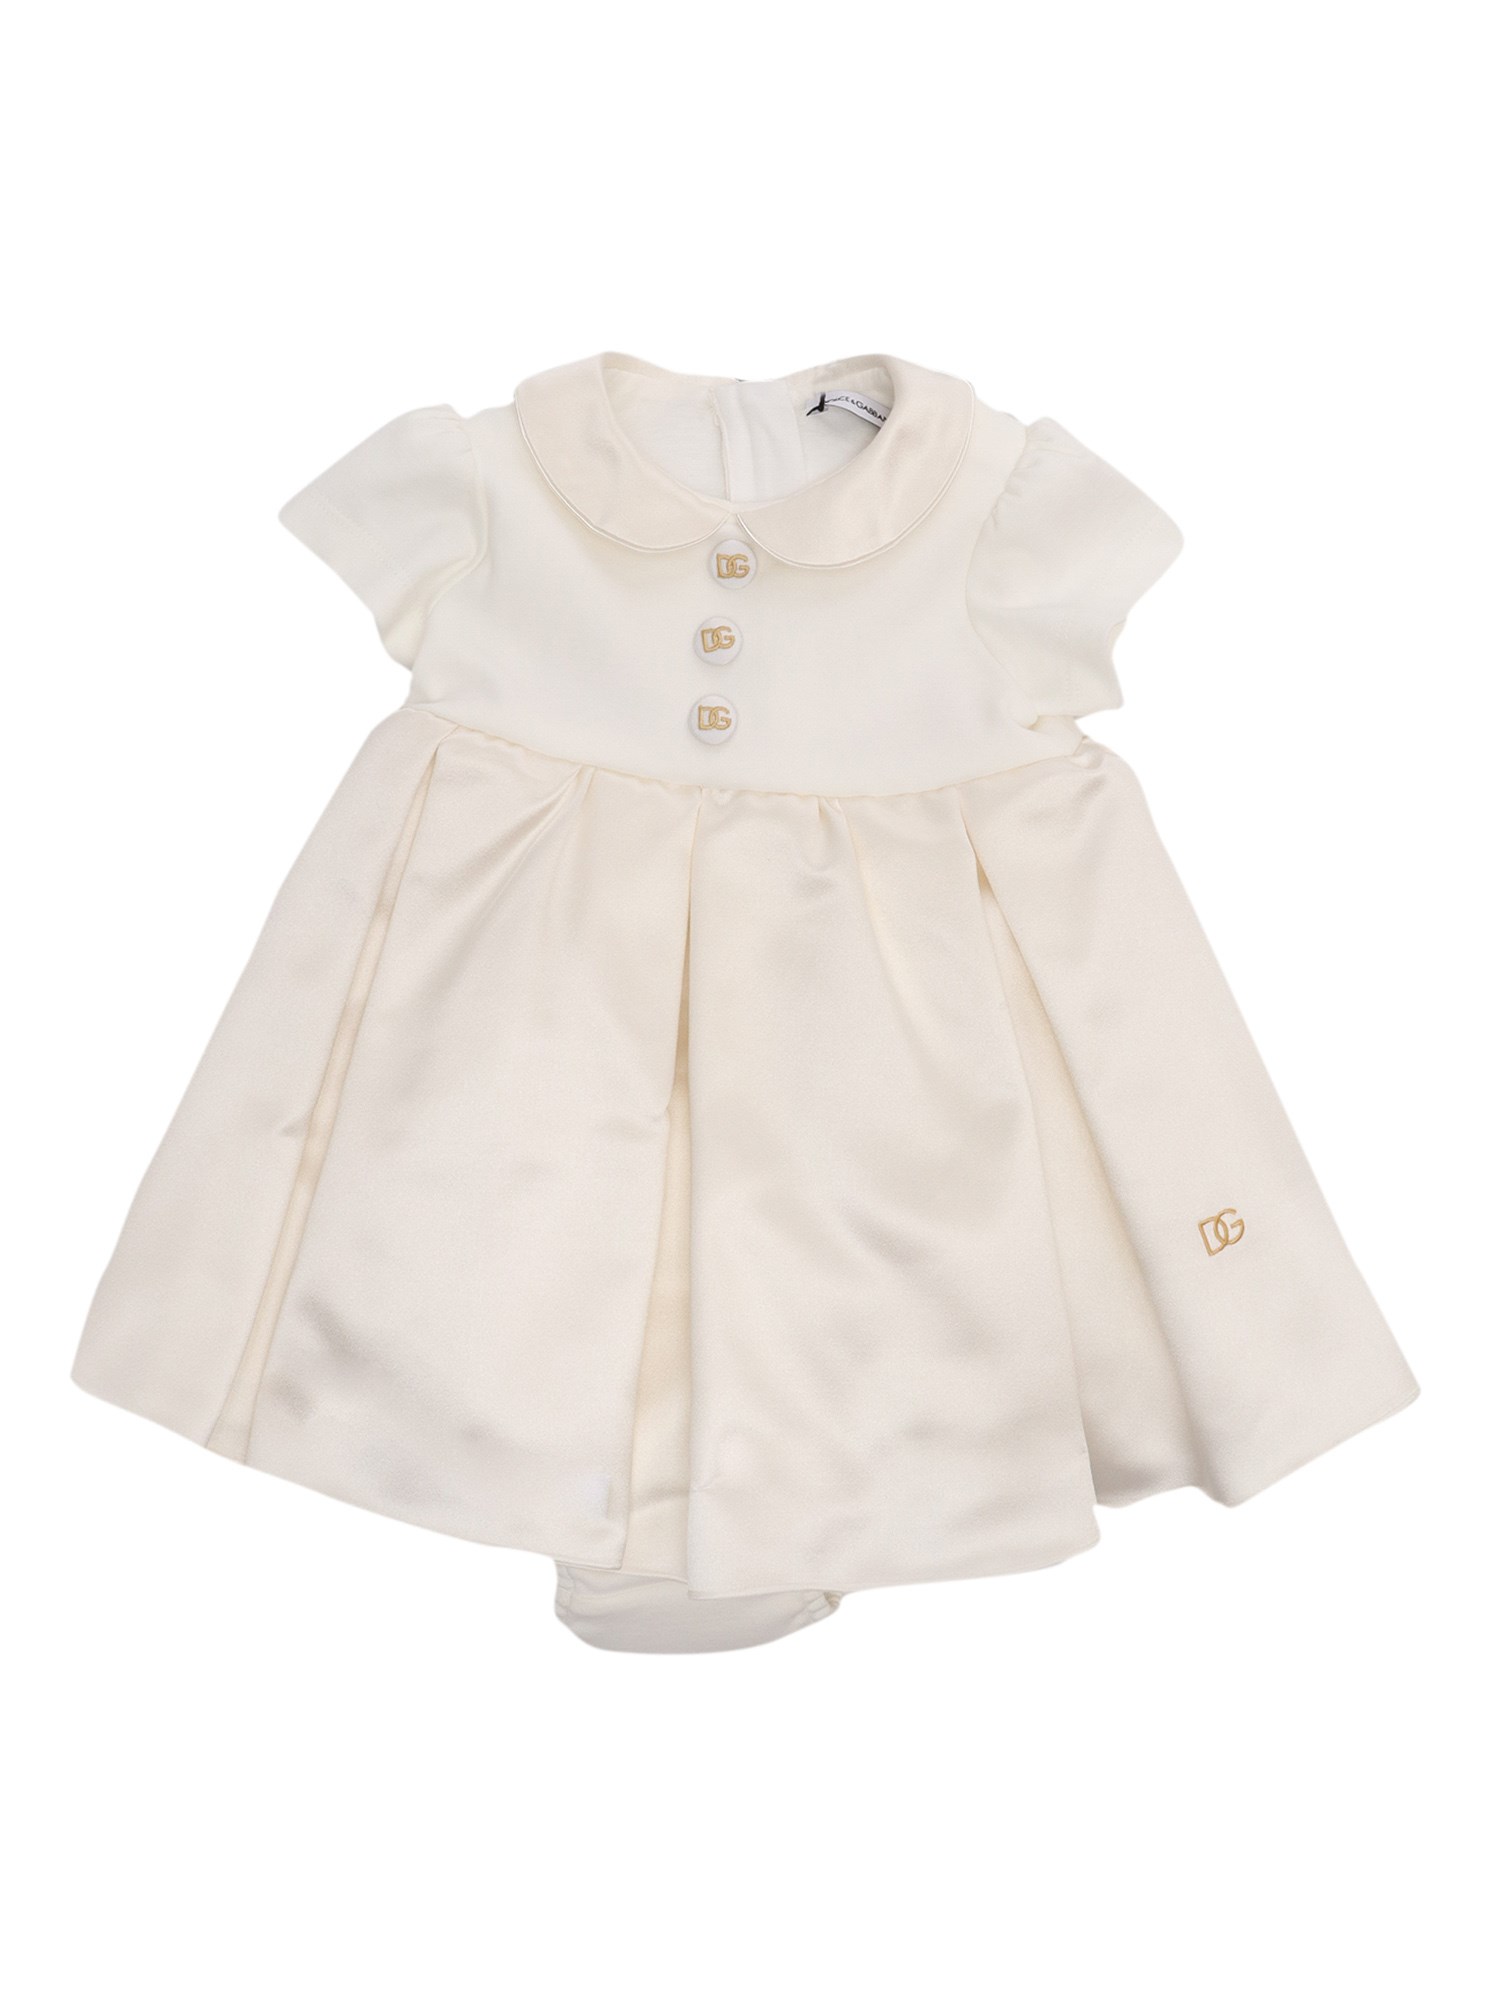 DOLCE & GABBANA JUNIOR FLARED DRESS AND BLOOMERS SET,L22DX8G7BNDS9000